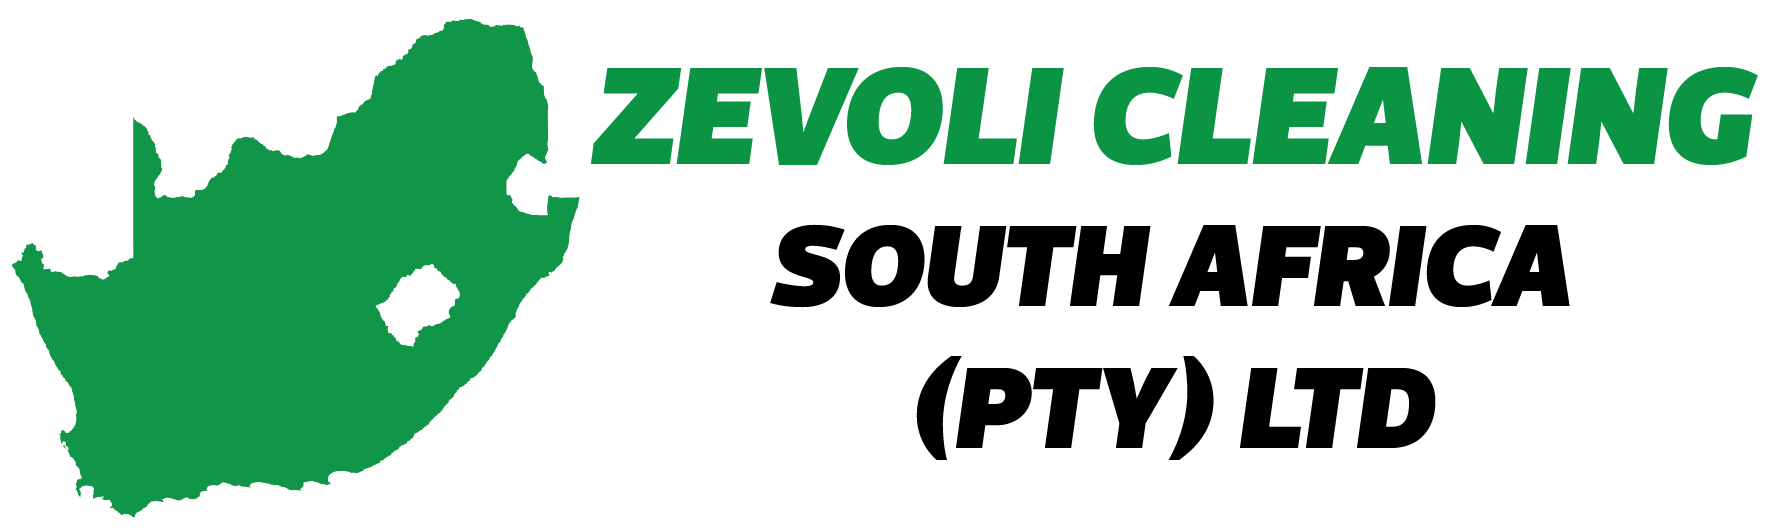 Zevoli Cleaning South Africa